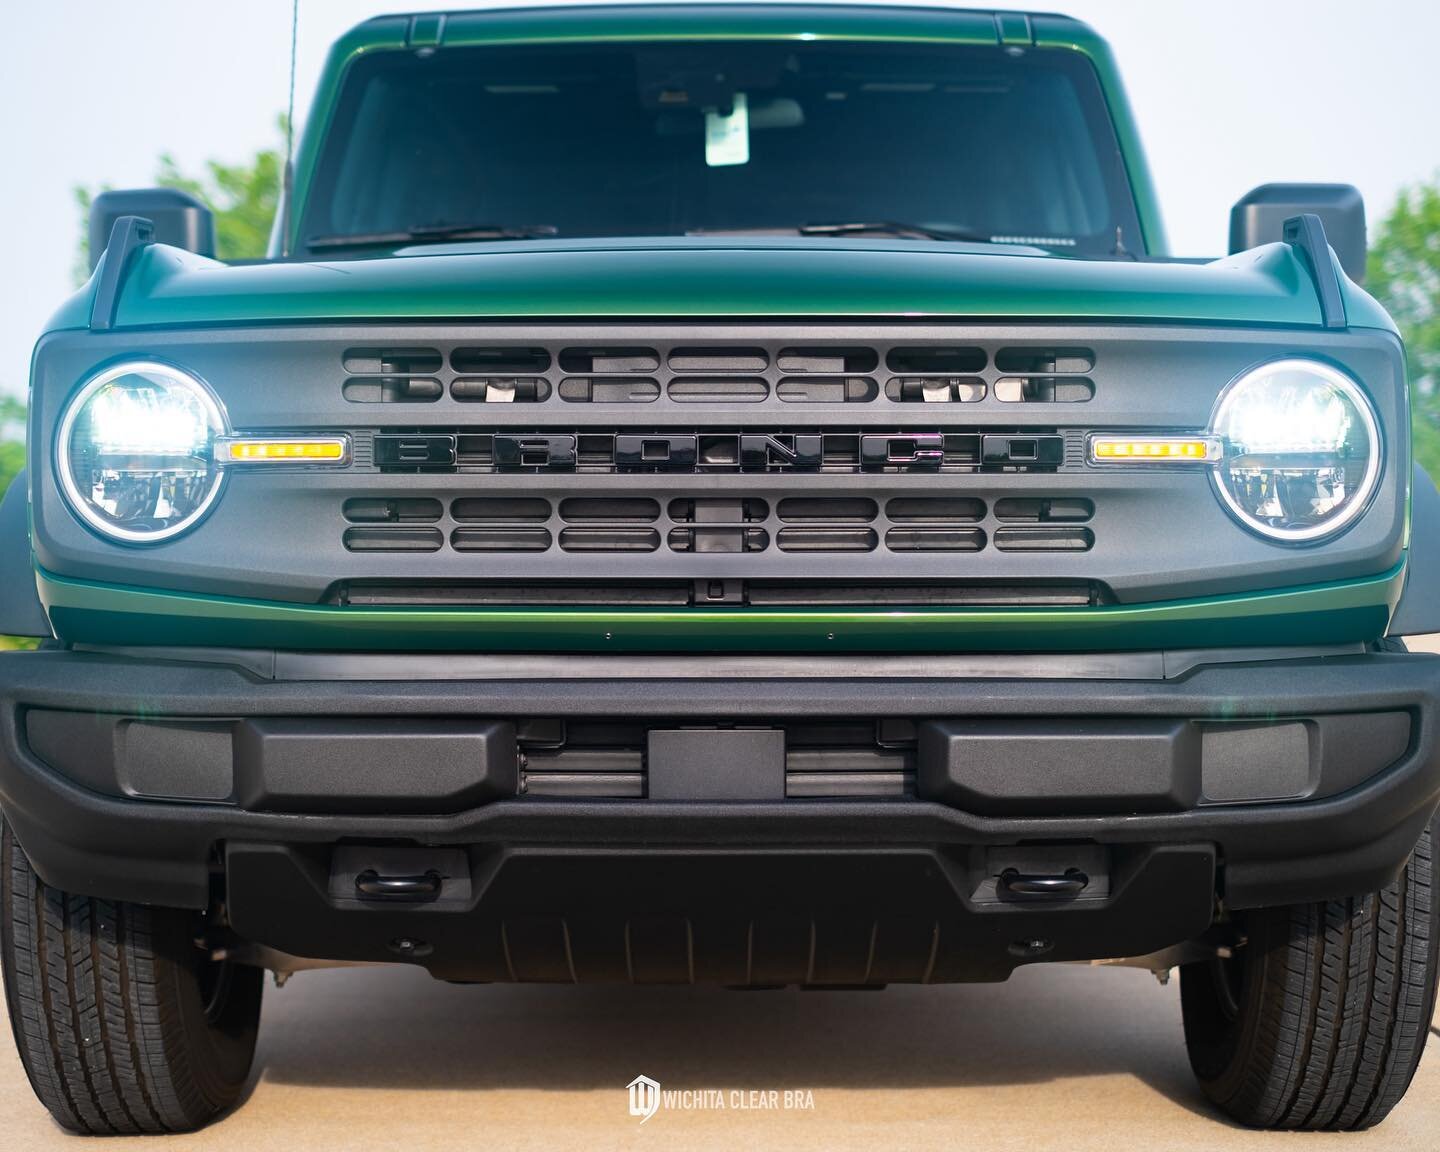 Happy St. Patrick's Day!
.
This Eruption Green @fordbronco is fully wrapped in @xpel paint protection film.
.
#WichitaClearBra #stpatricksday #green #bronco #fordbronco #eruptiongreen #wichitakansas #🍀